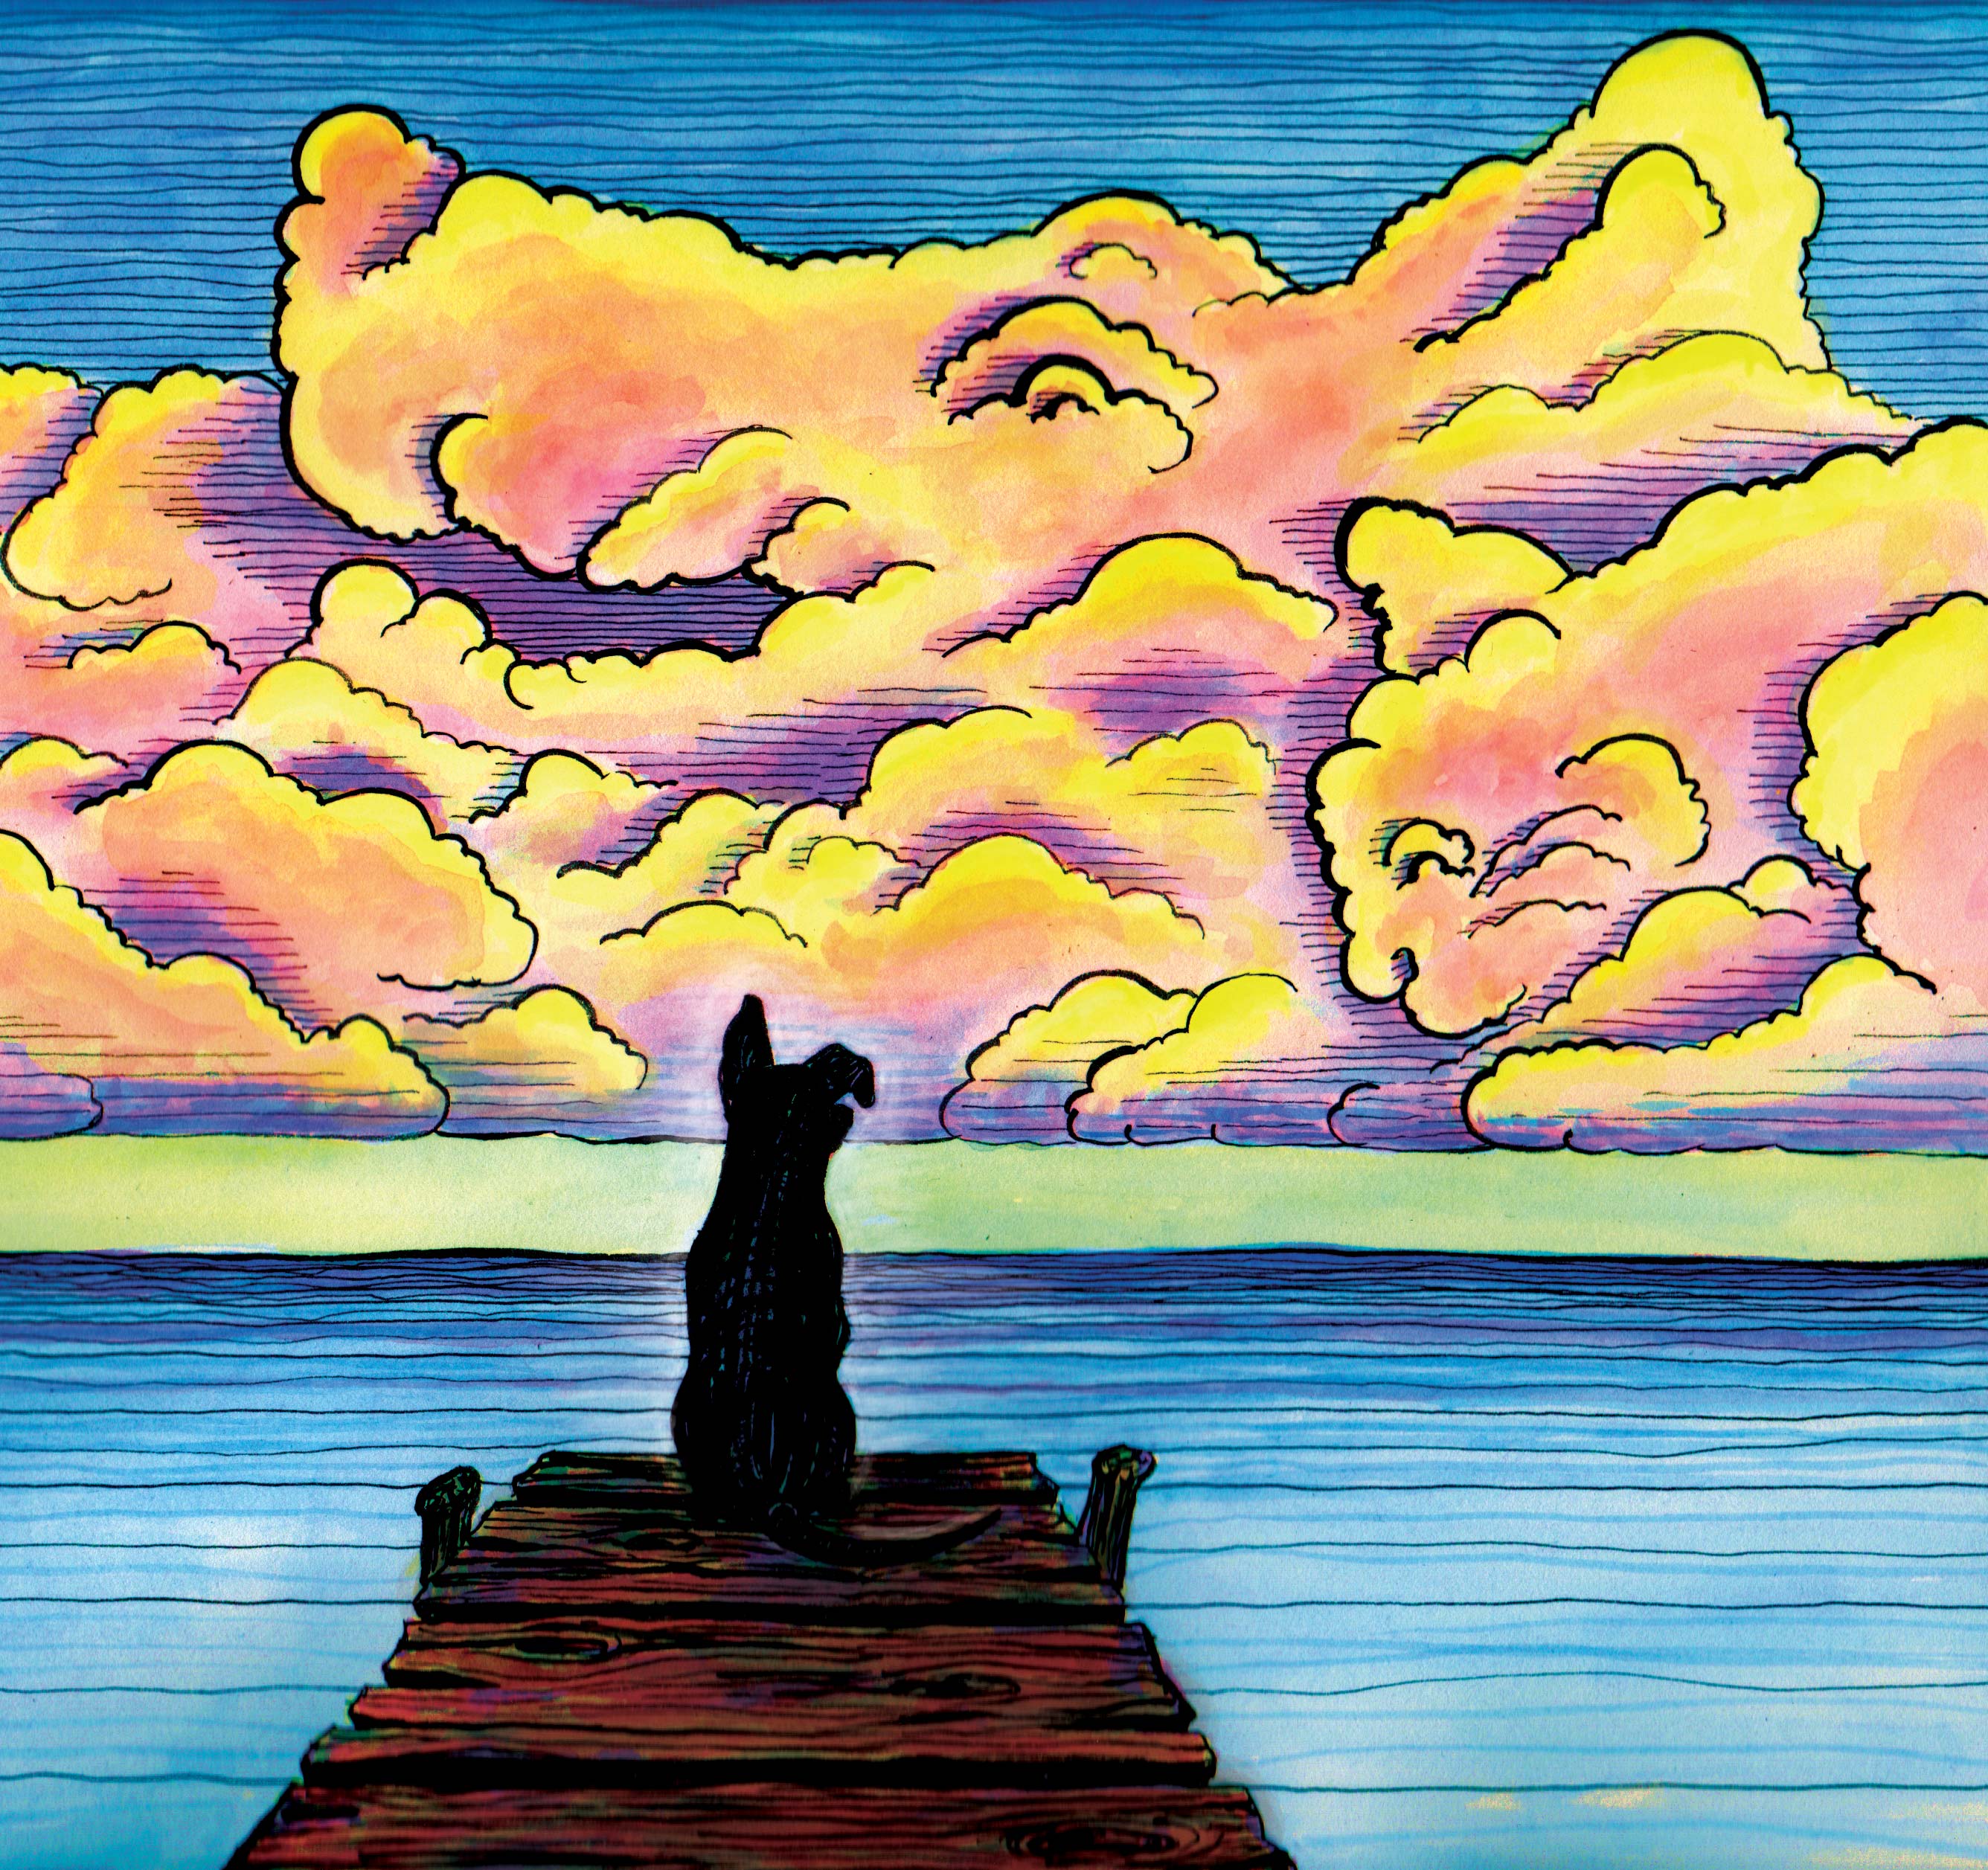 colorful image of dog on pier, watching the clouds